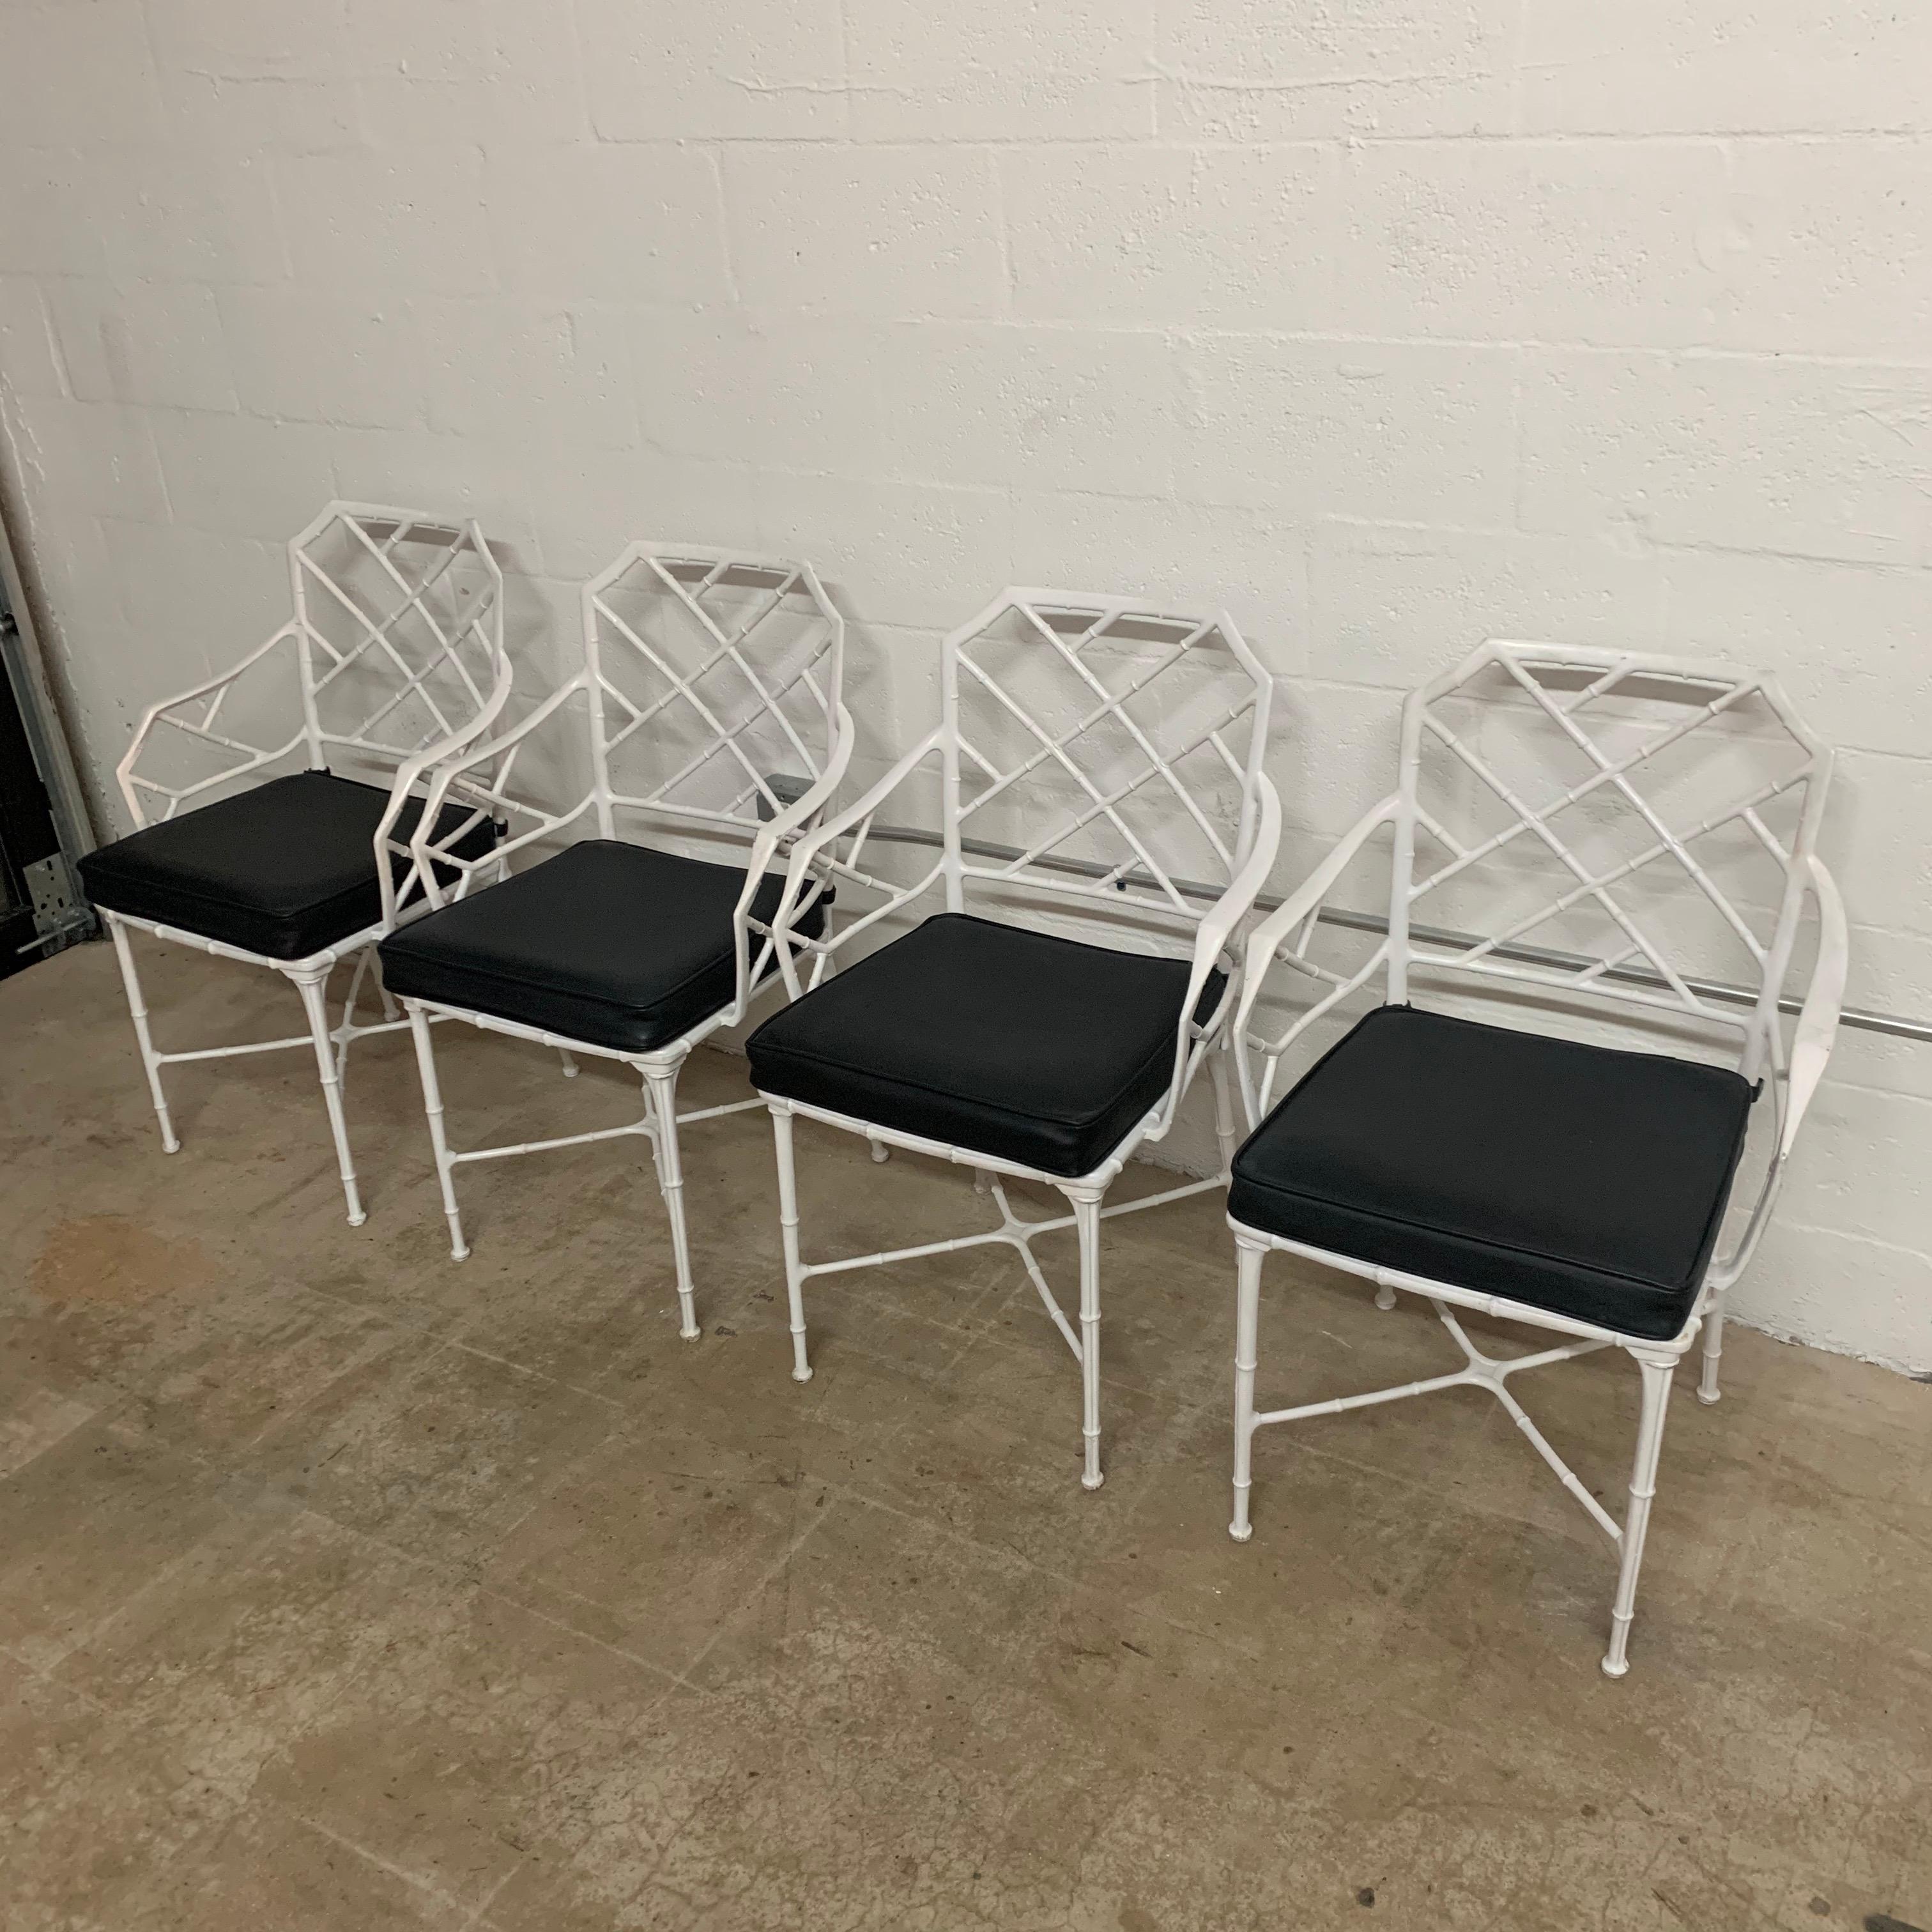 Classic set of Chinese Chippendale faux bamboo dining chairs for outdoor, garden, or patio with arms rendered in original white powder coated cast aluminum with black marine grade vinyl cushions. Designed by Hall Bradley for Brown Jordan, 1967.